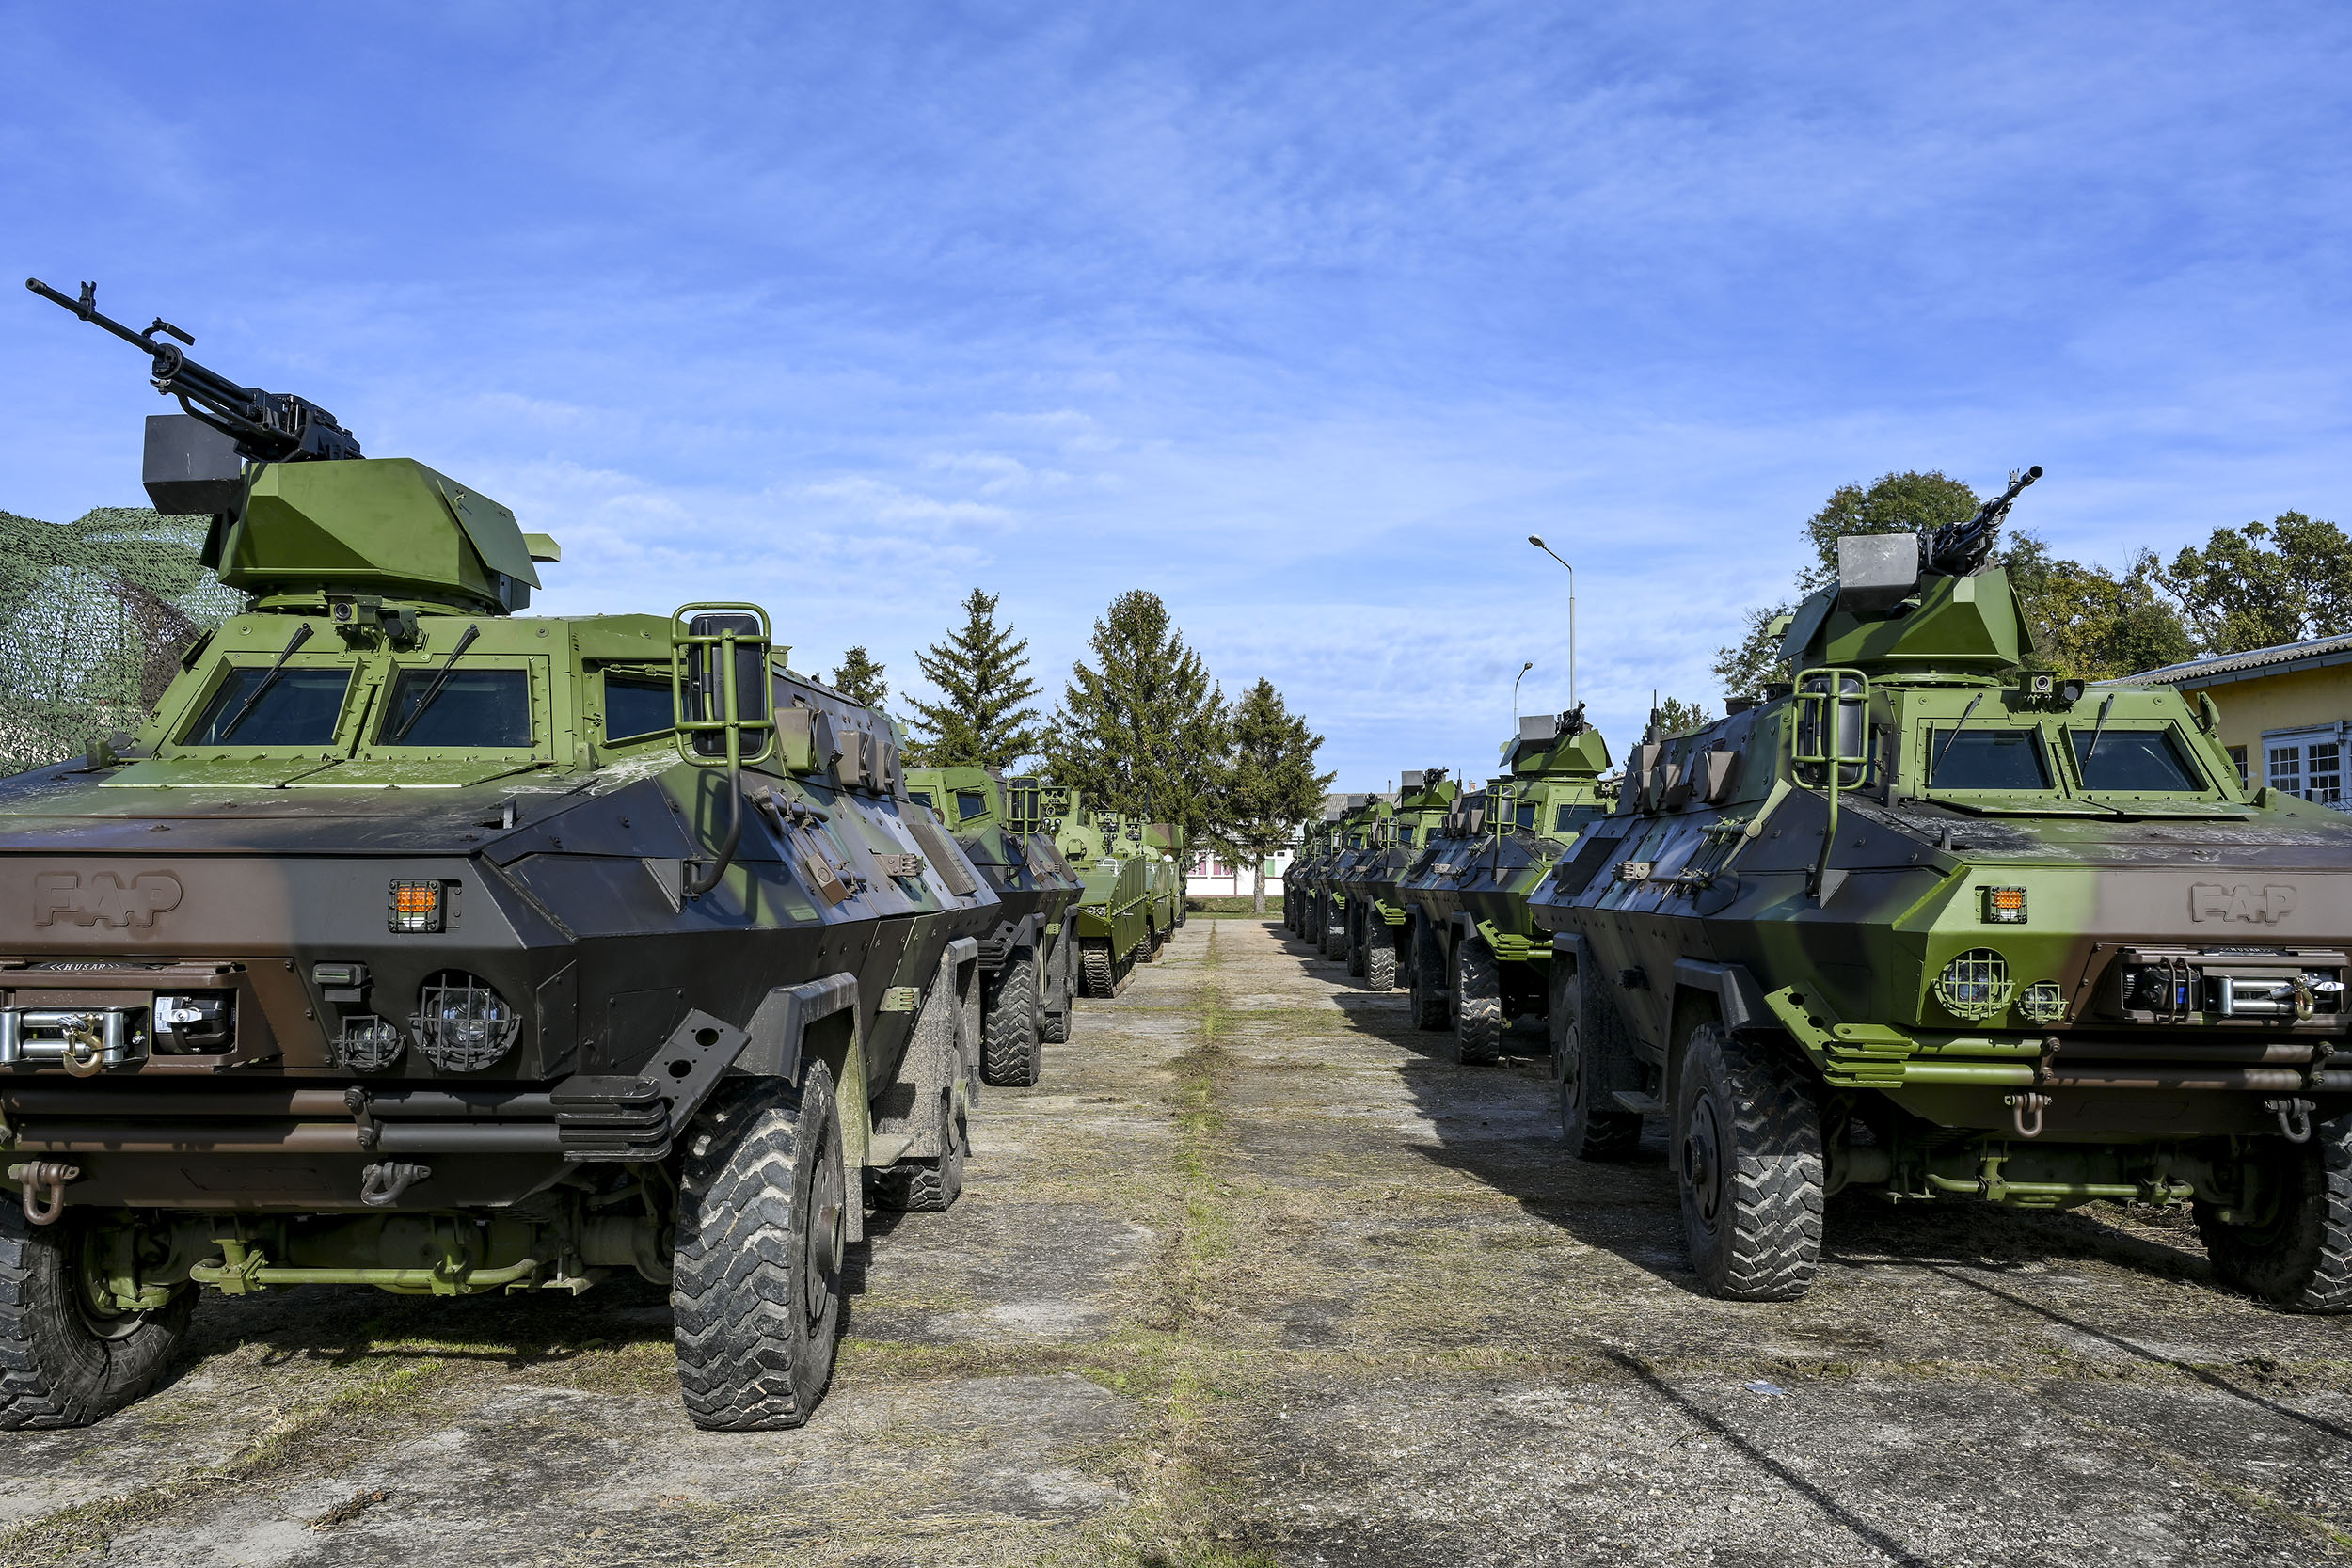 Serbian Armored vehicles